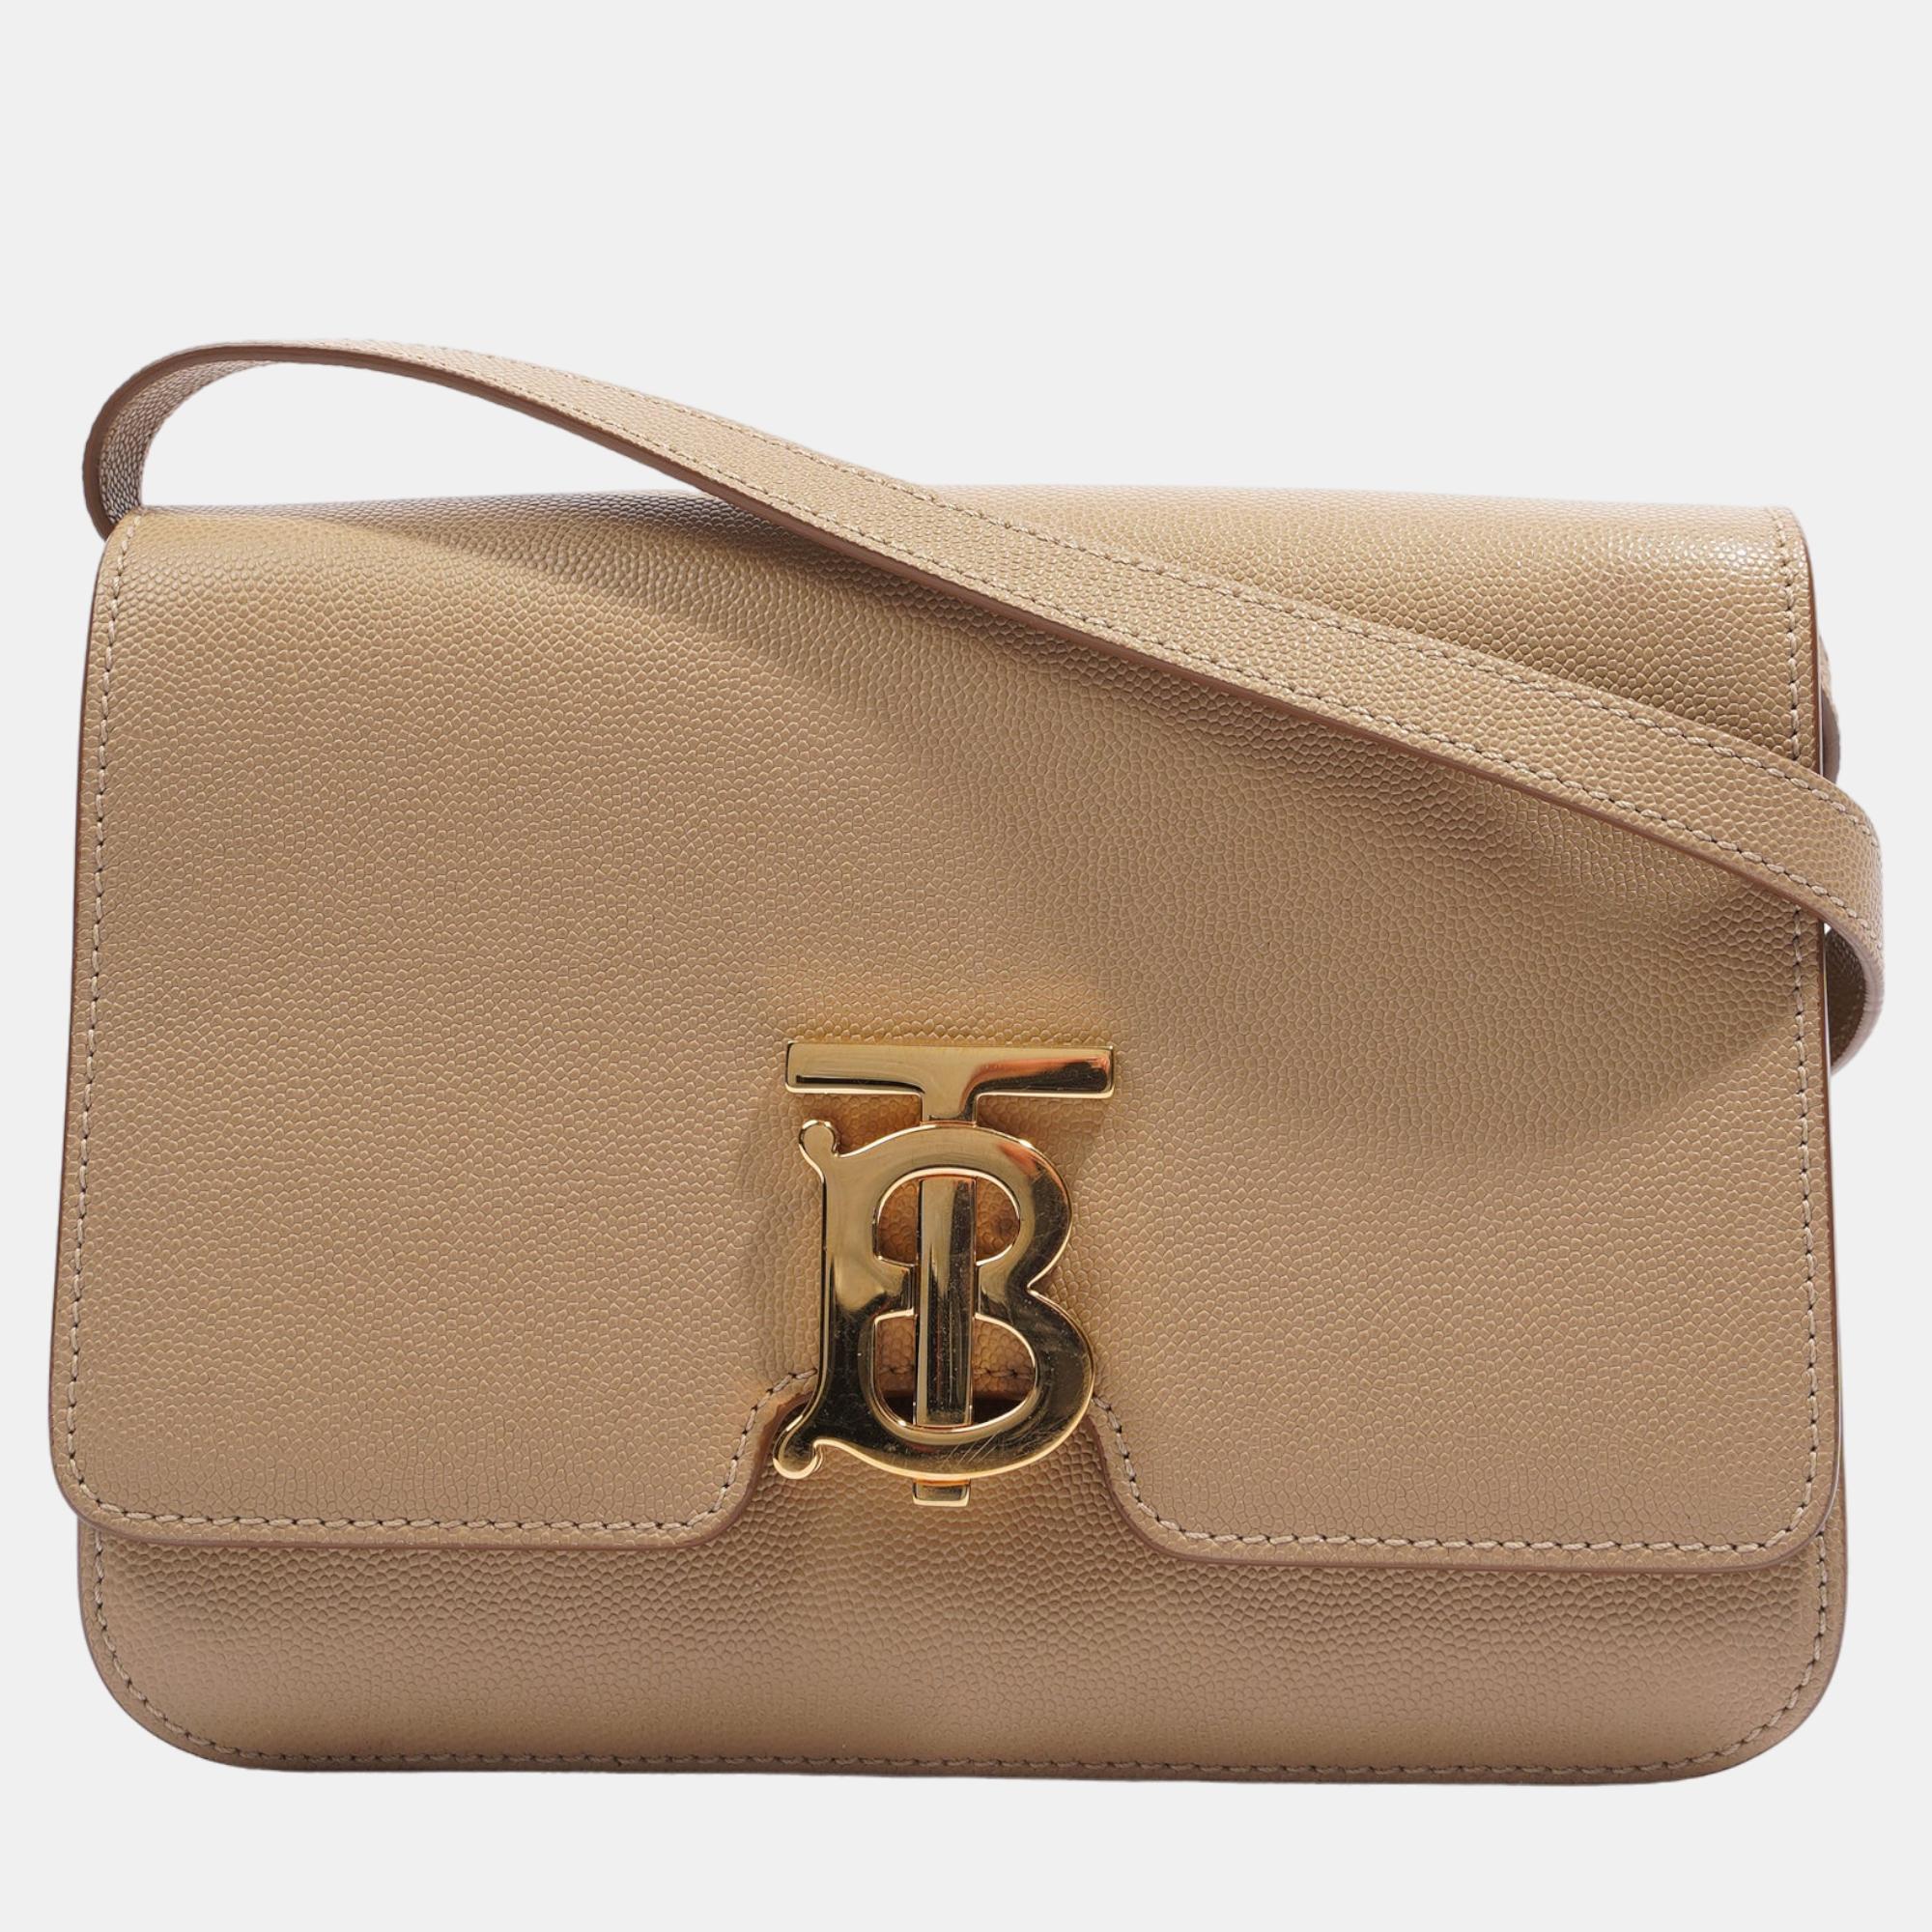 Burberry TB Bag Archive Beige Calfskin Leather Small